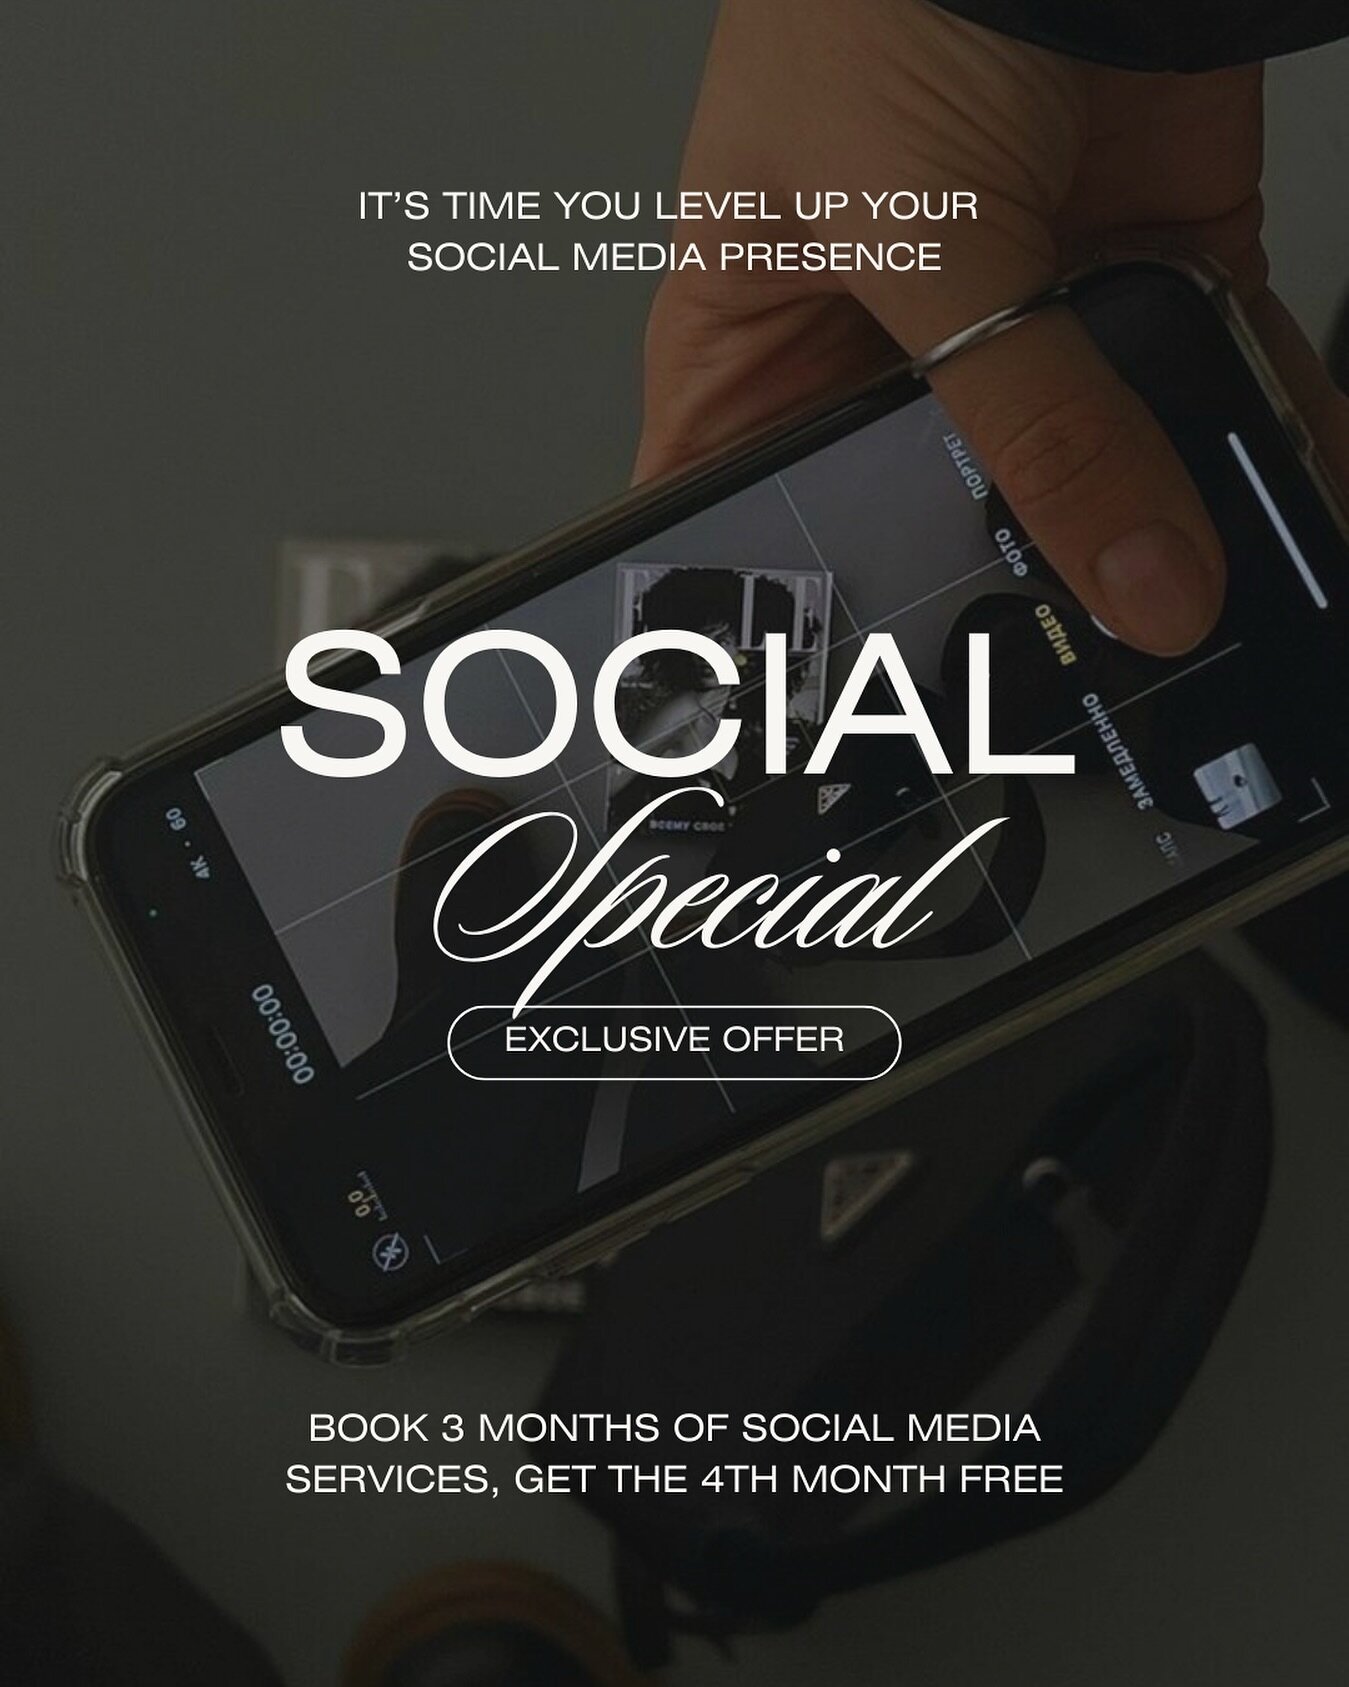 Black Friday and Cyber Monday may be over, but our deals are just getting started! 💸 For a limited time only, Clover &amp; Kith Creative is offering a year-end Social Special:

✨Book 3 months of Social Media services, get the 4th month FREE✨

It&rsq